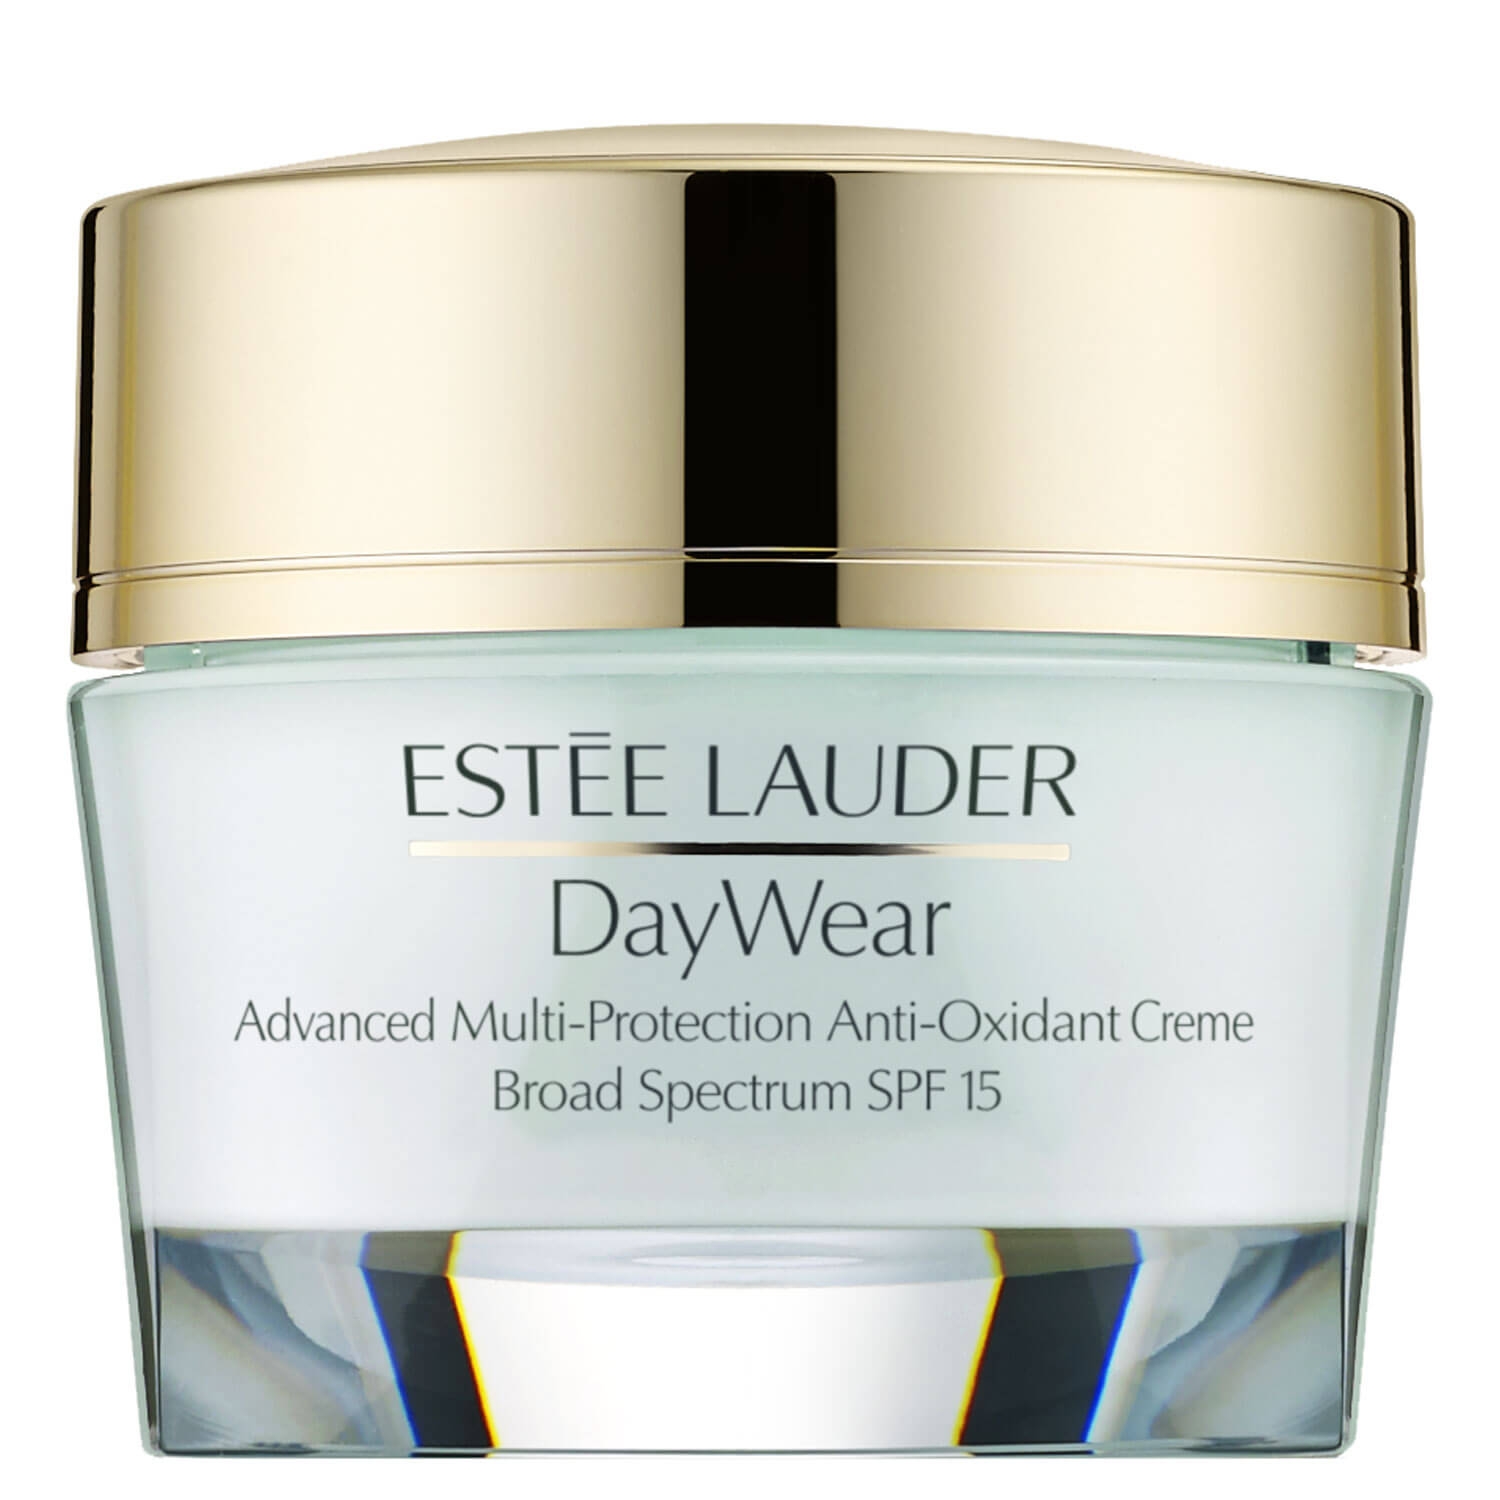 Product image from DayWear - Advanced Multi-Protection Anti-Oxidant Creme SPF15 Dry Skin